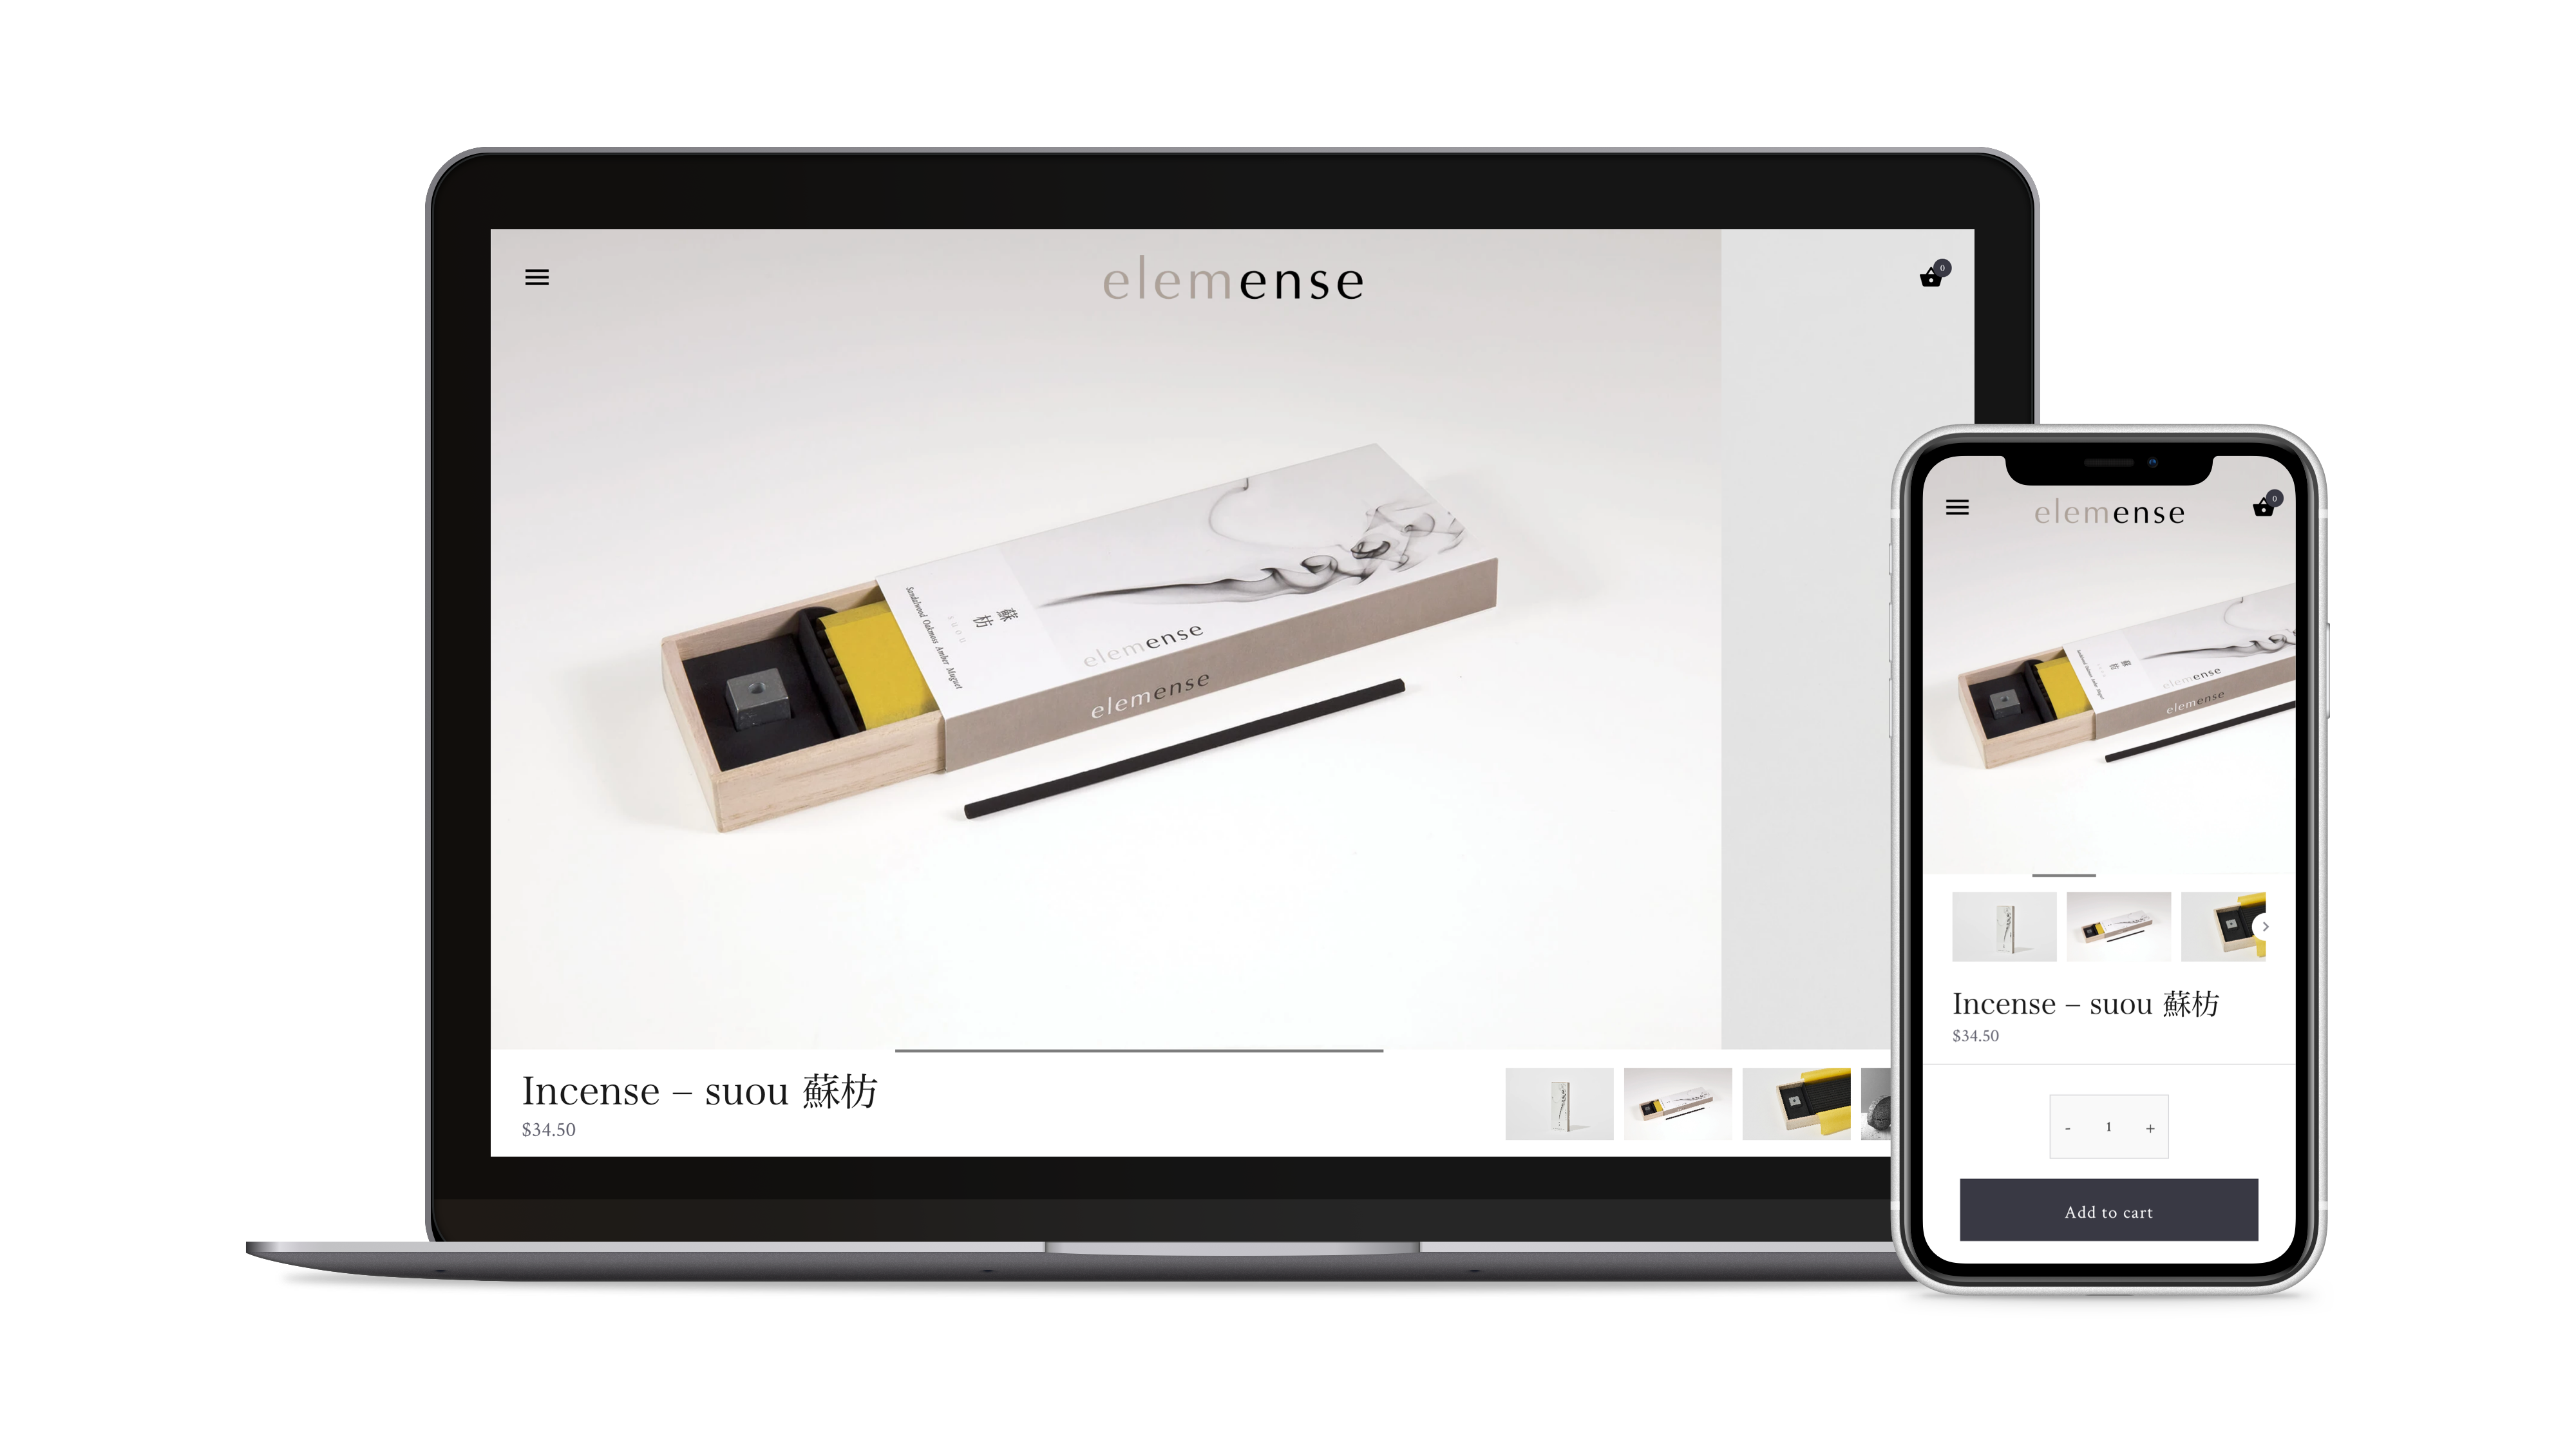 elemense product pages